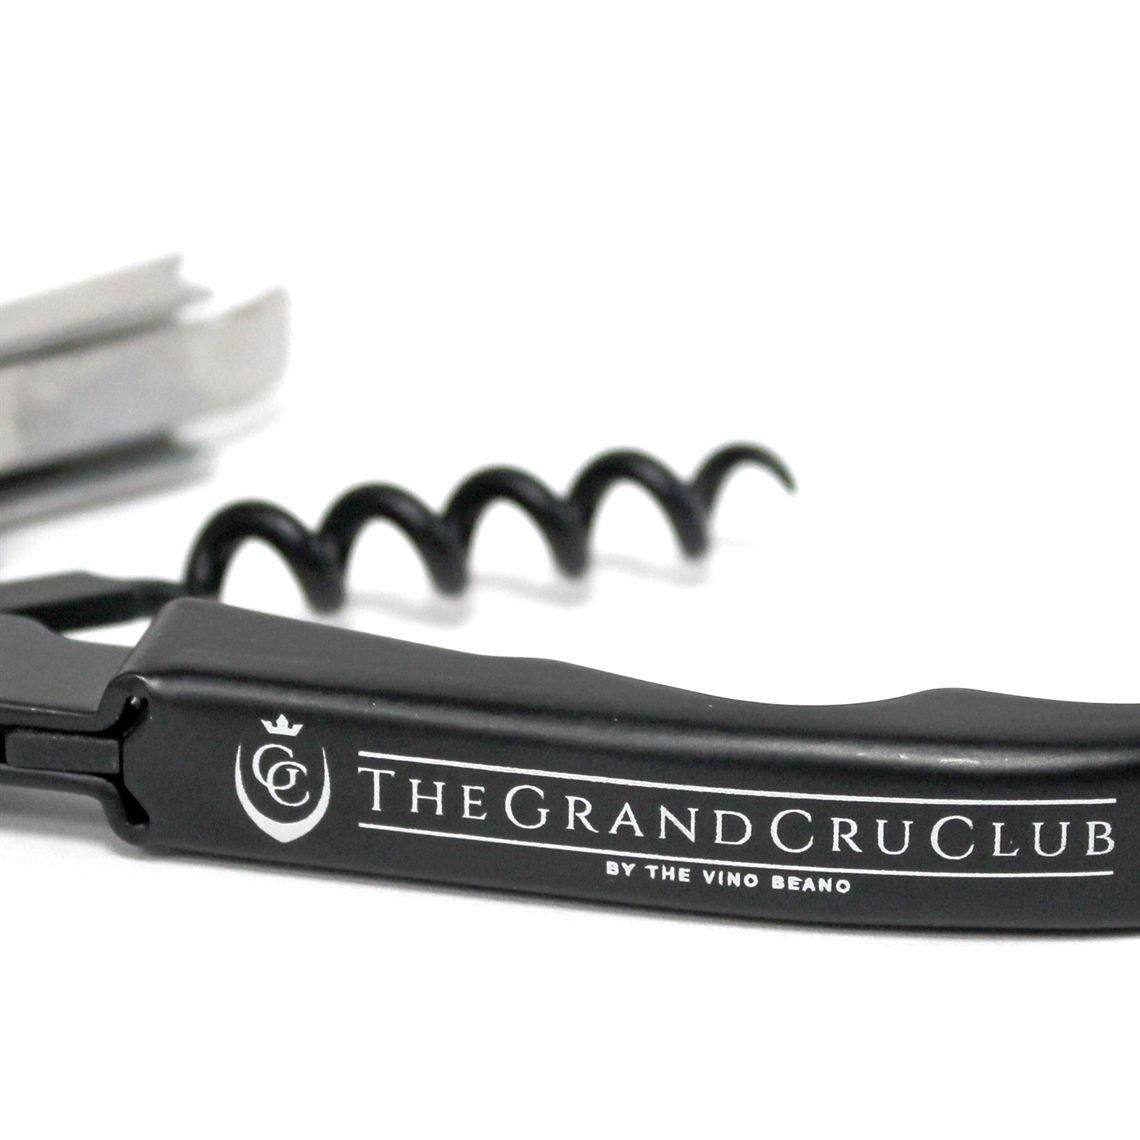 View more how to use a double lever corkscrew from our Branded Corkscrews & Bottle Openers range